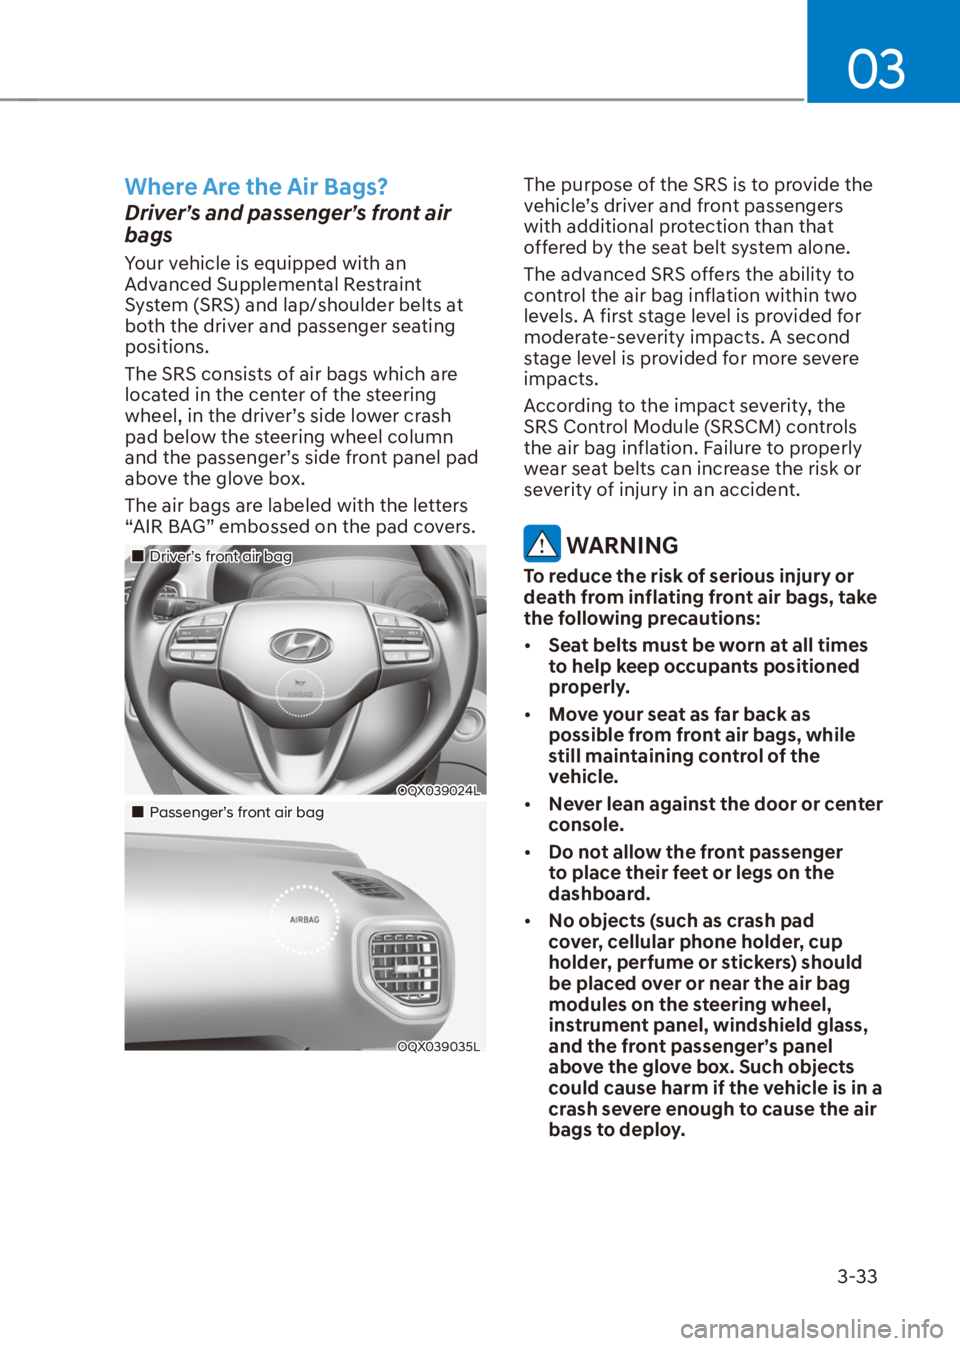 HYUNDAI VENUE 2021  Owners Manual 03
3-33
Where Are the Air Bags?
Driver’s and passenger’s front air 
bags
Your vehicle is equipped with an 
Advanced Supplemental Restraint 
System (SRS) and lap/shoulder belts at 
both the driver 